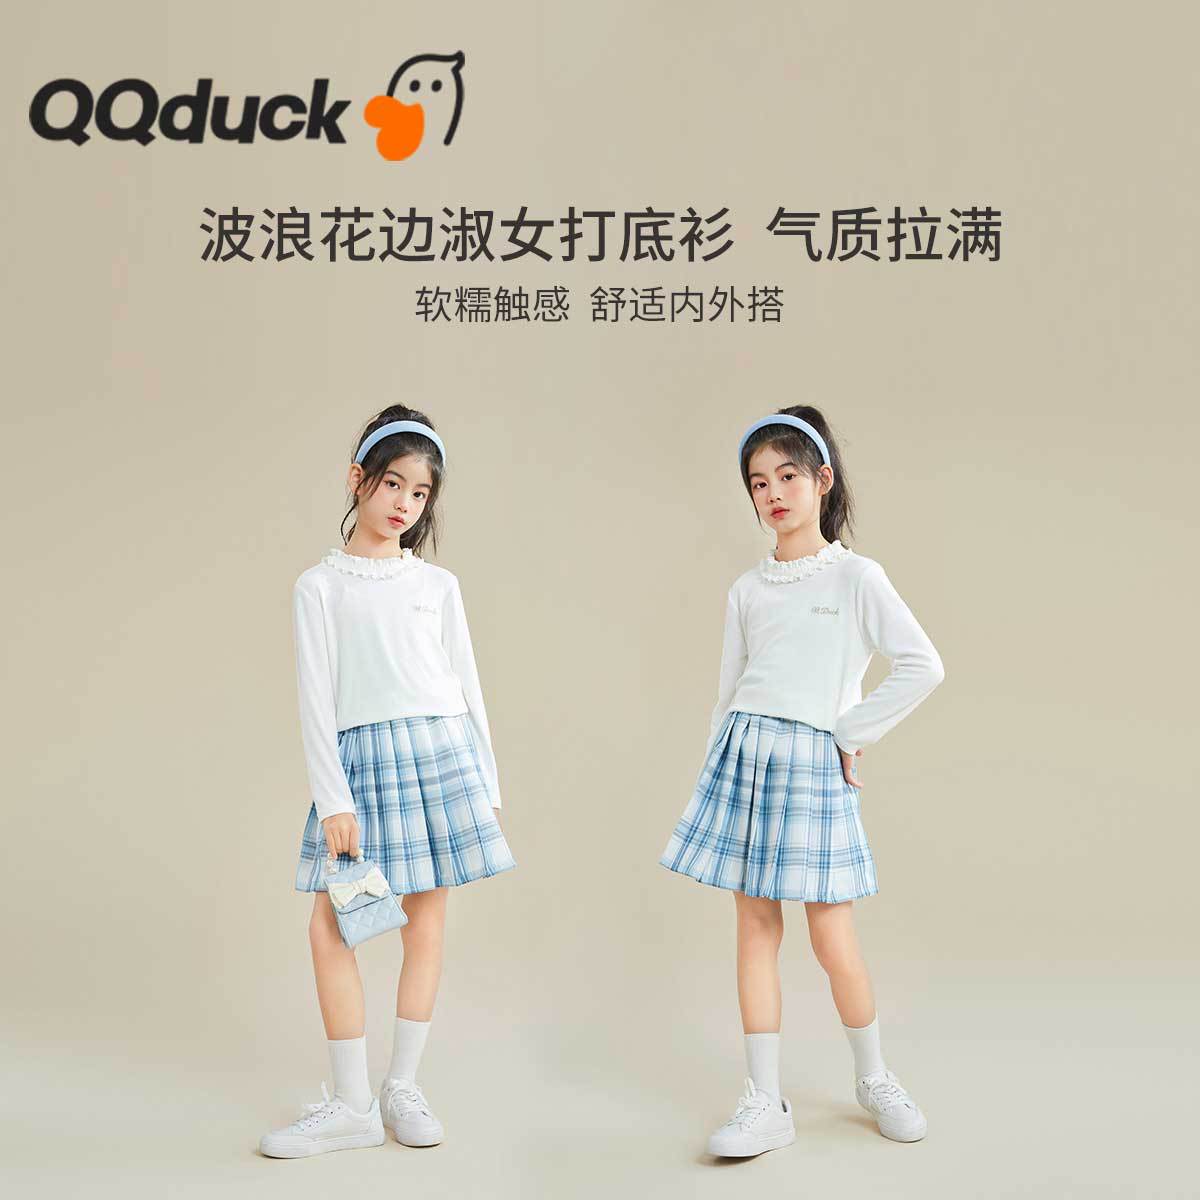 QQ Duck Children's Wear Spring New Girl's Bottom, Lace Neck Top, Long Sleeve Pullover, Comfortable and Versatile